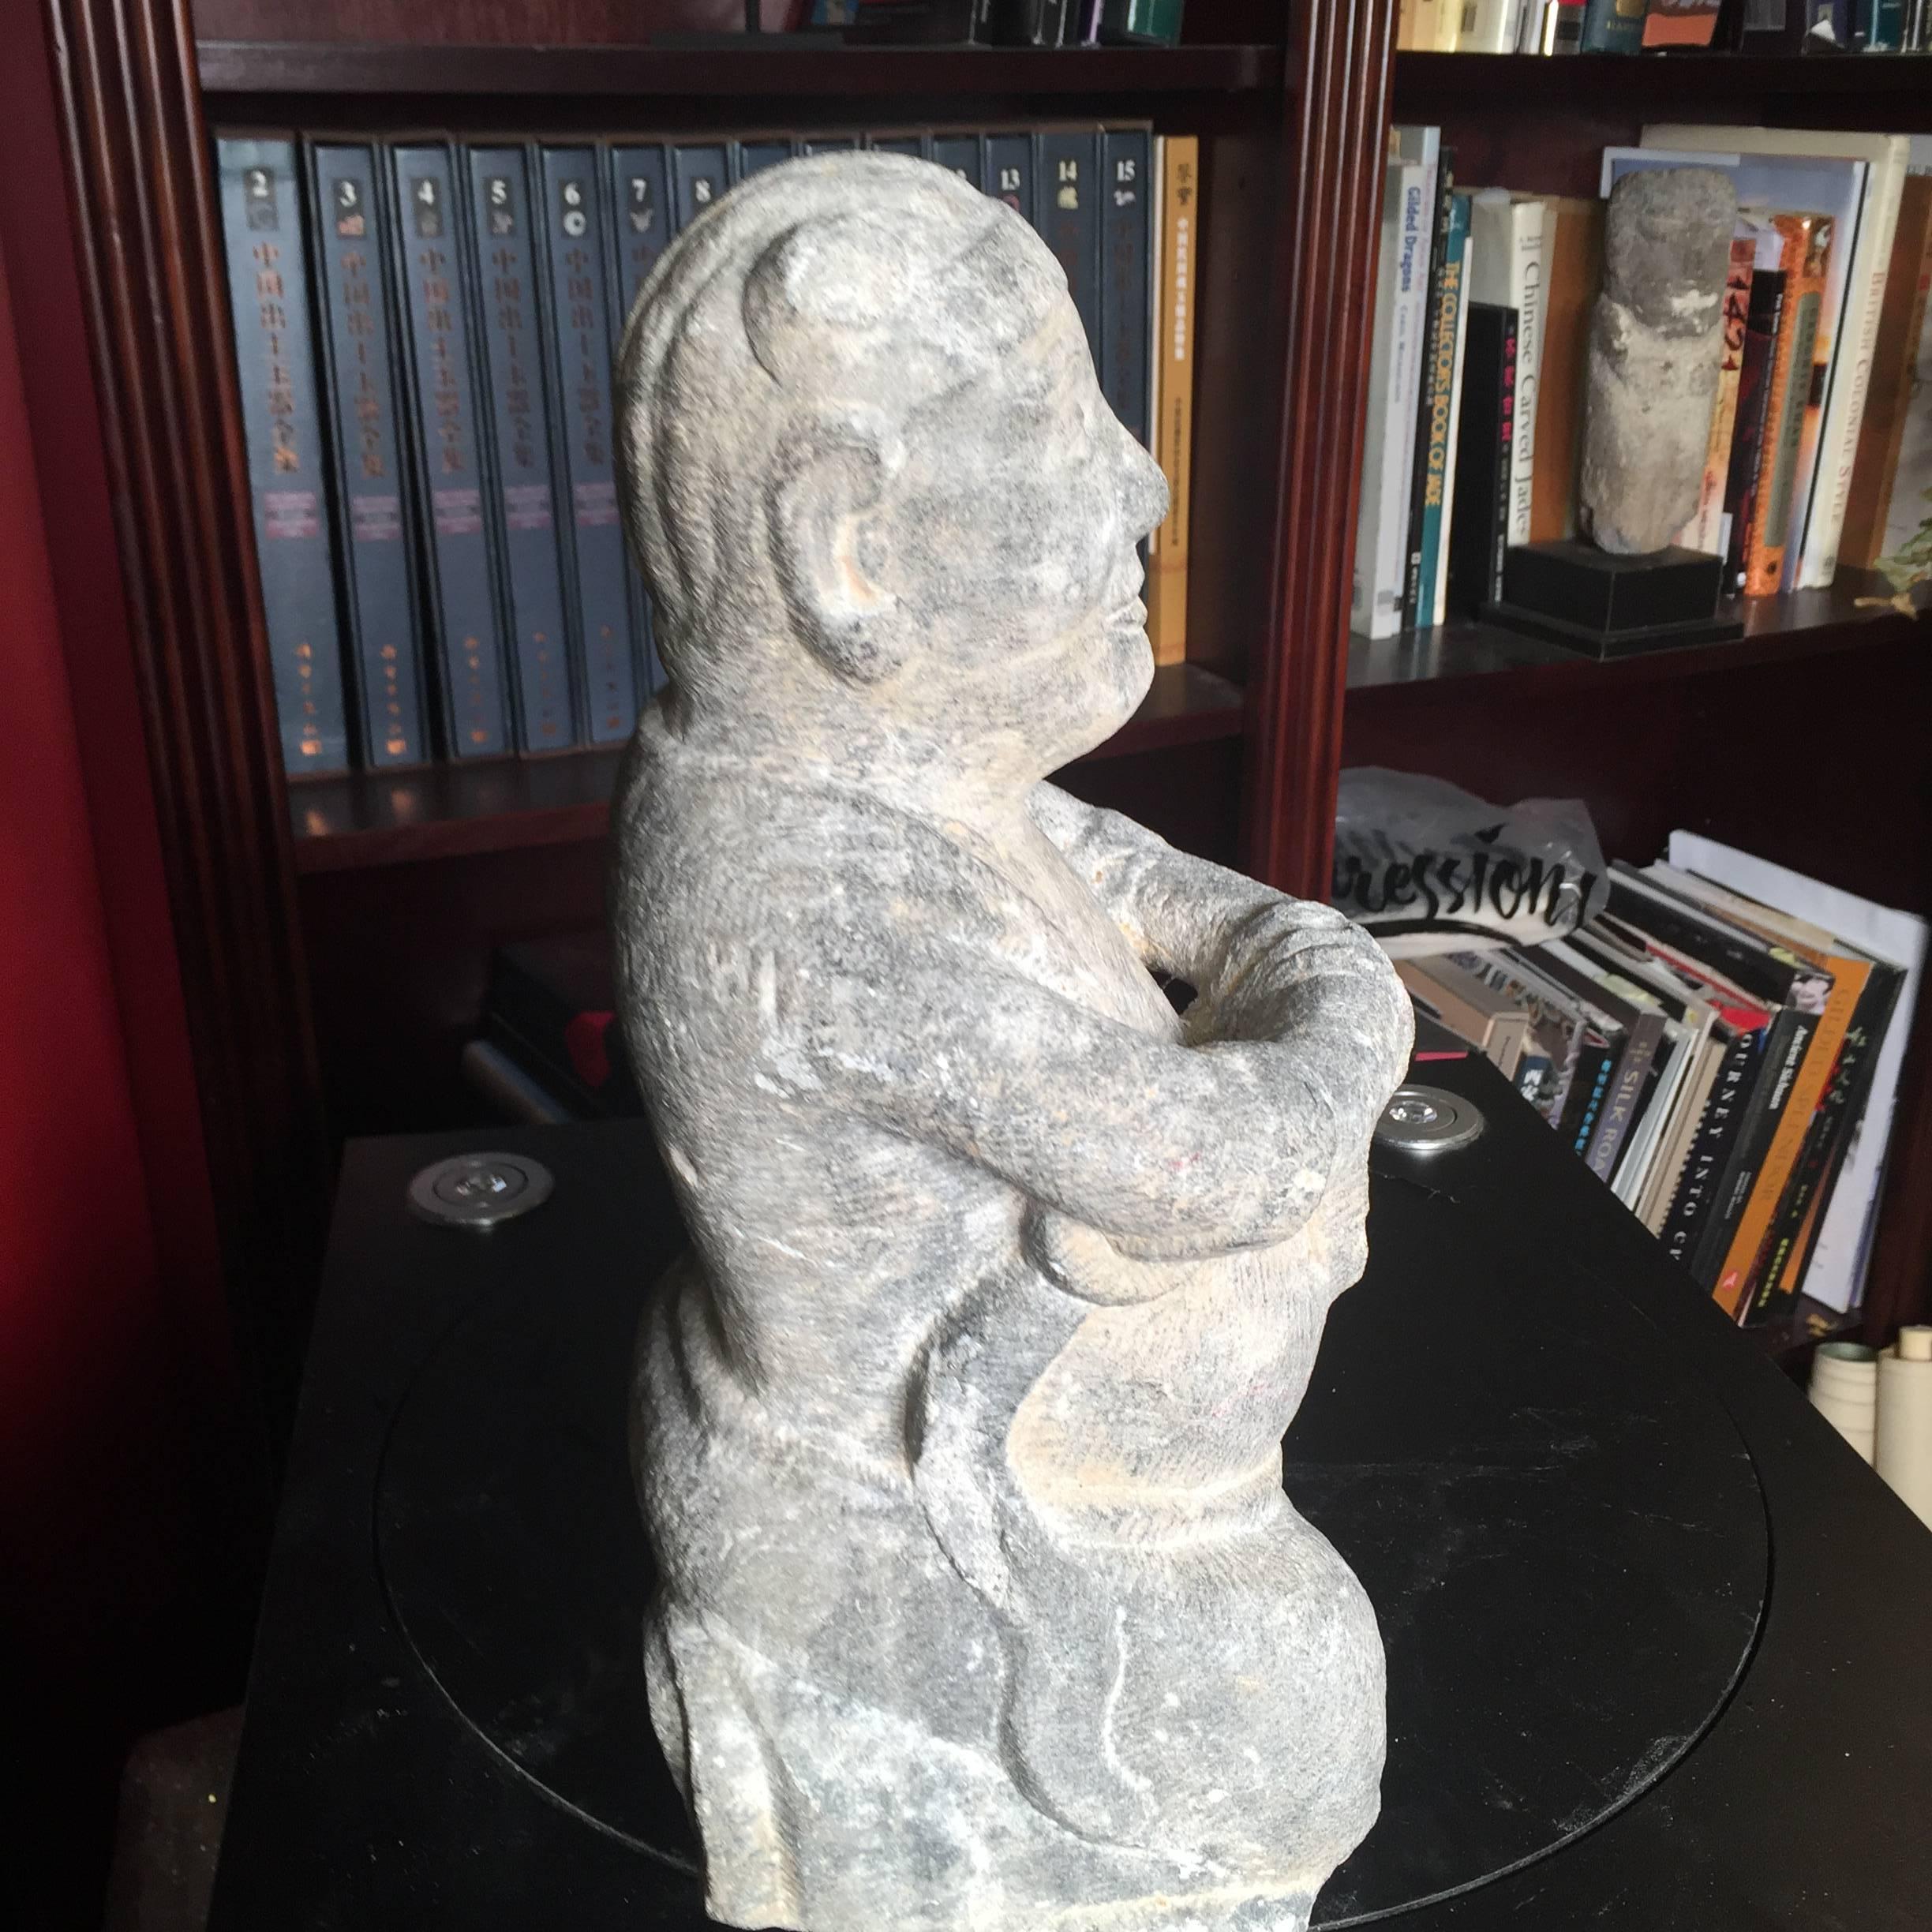 China Important Hand Carved Stone Effigy of Attendant, Qing Dynasty (Kalkstein)